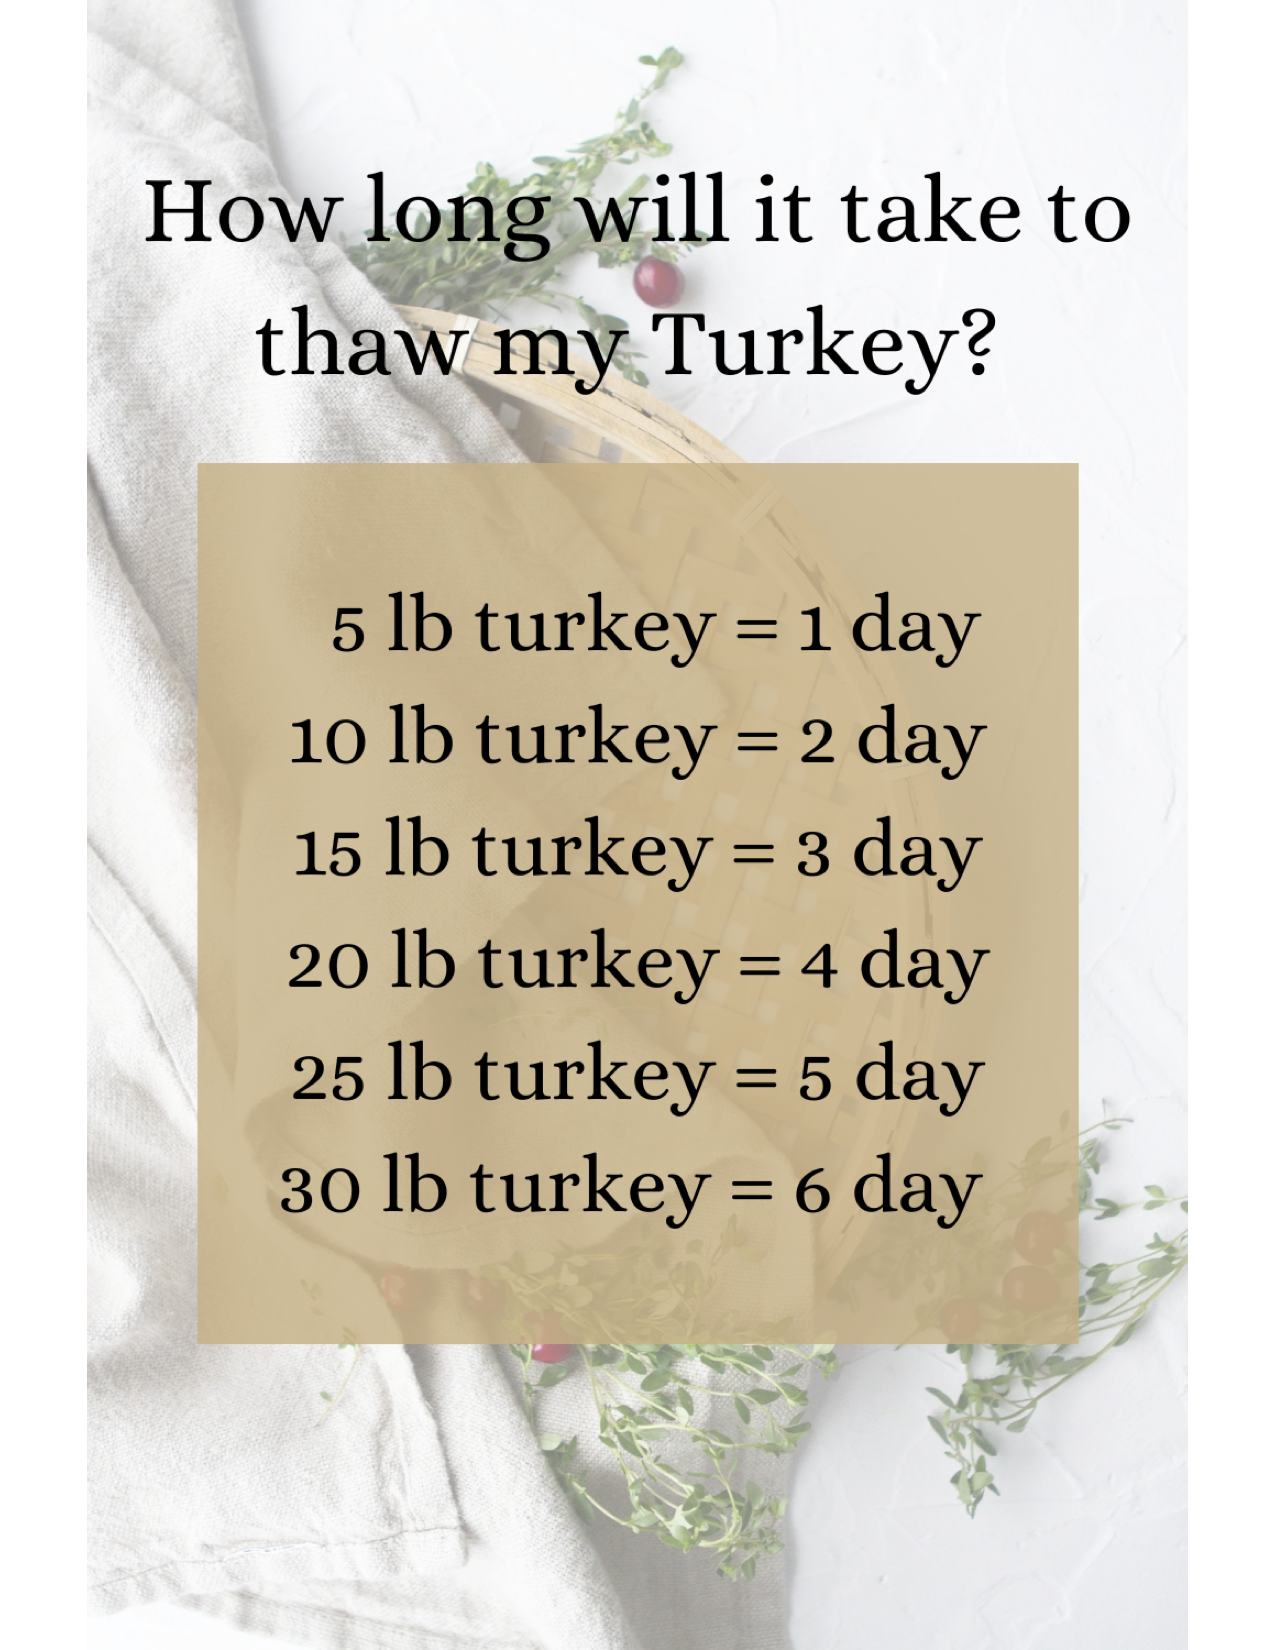 turkey thaw guide by lbs and days